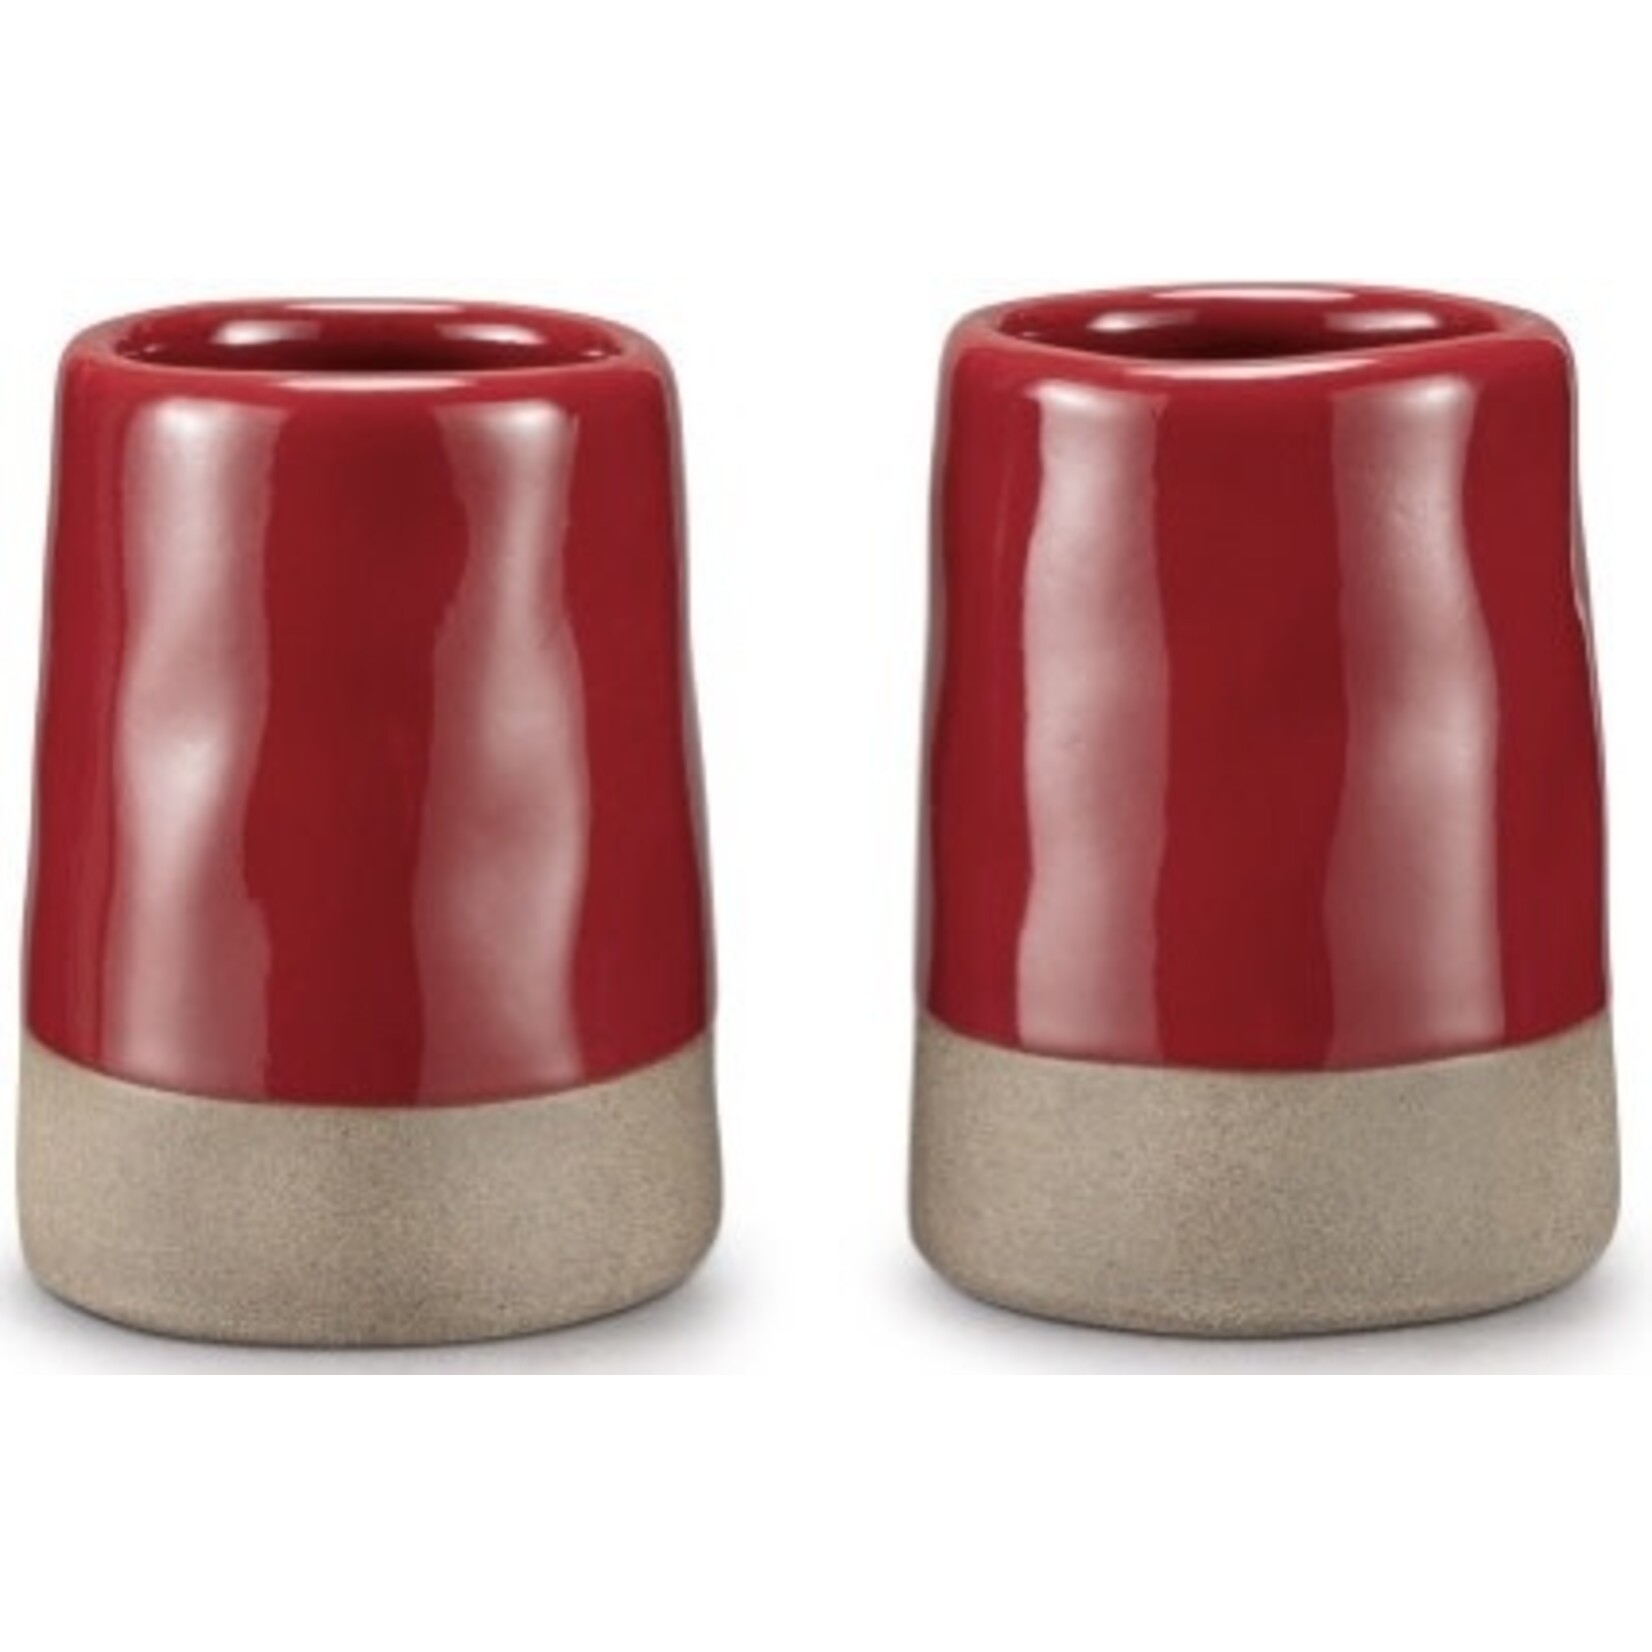 Demdaco Red Take Your Pick Toothpick Holder & Matchstrike Holder